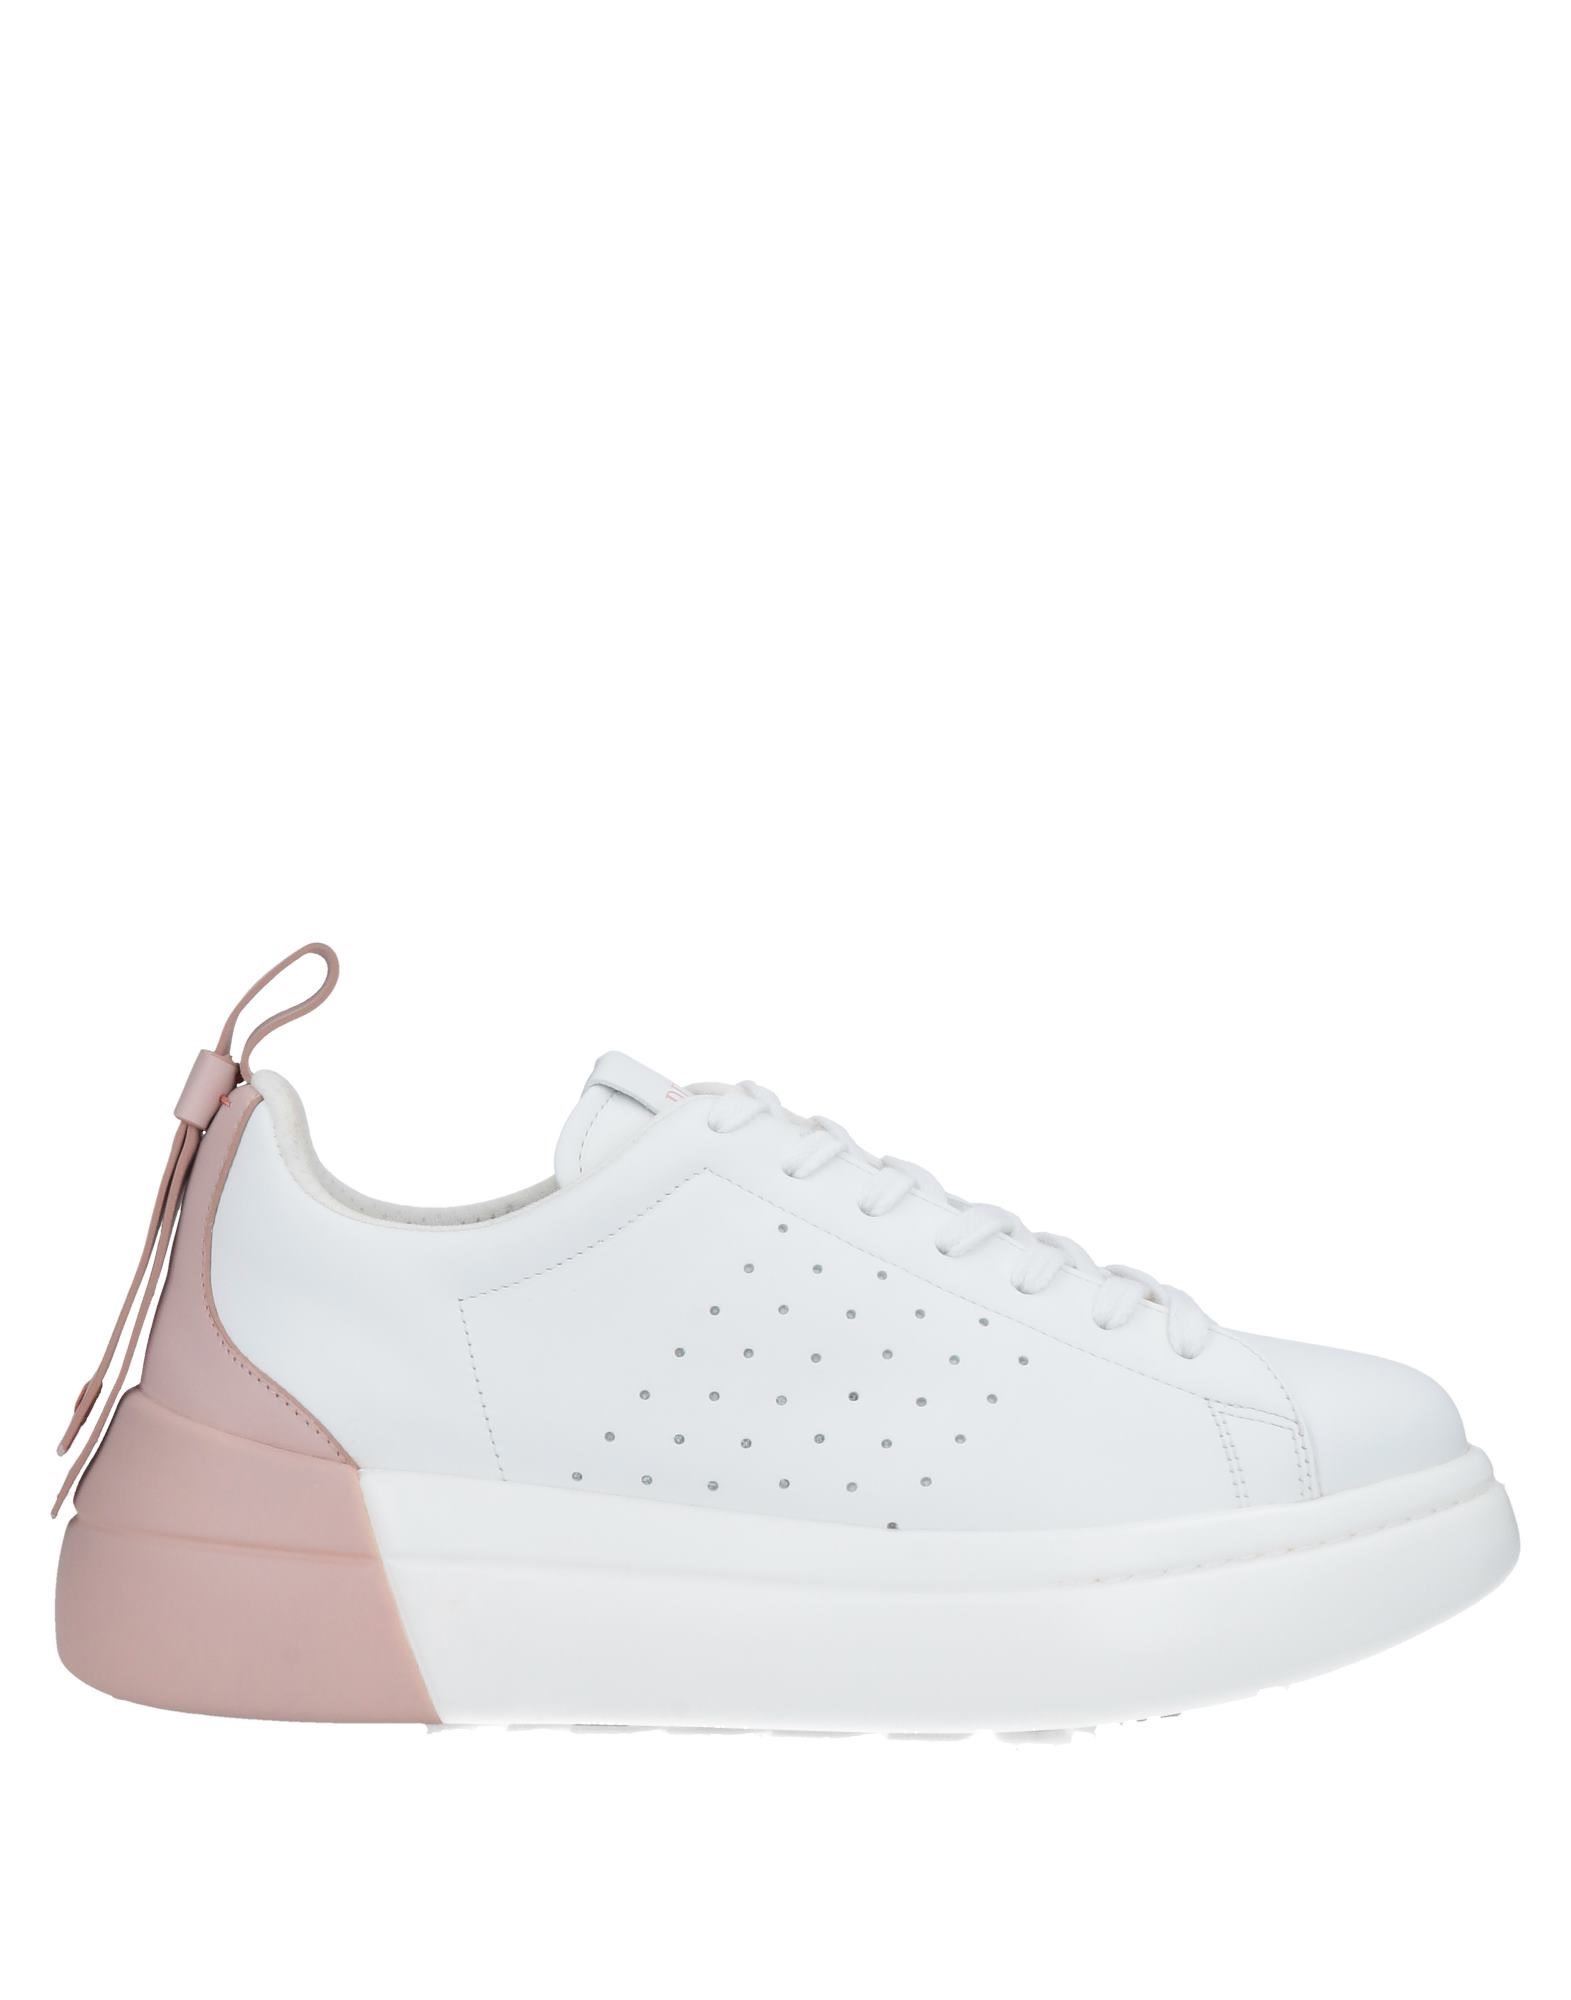 Redv Red(v) Woman Sneakers Blush Size 6 Soft Leather In Pale Pink